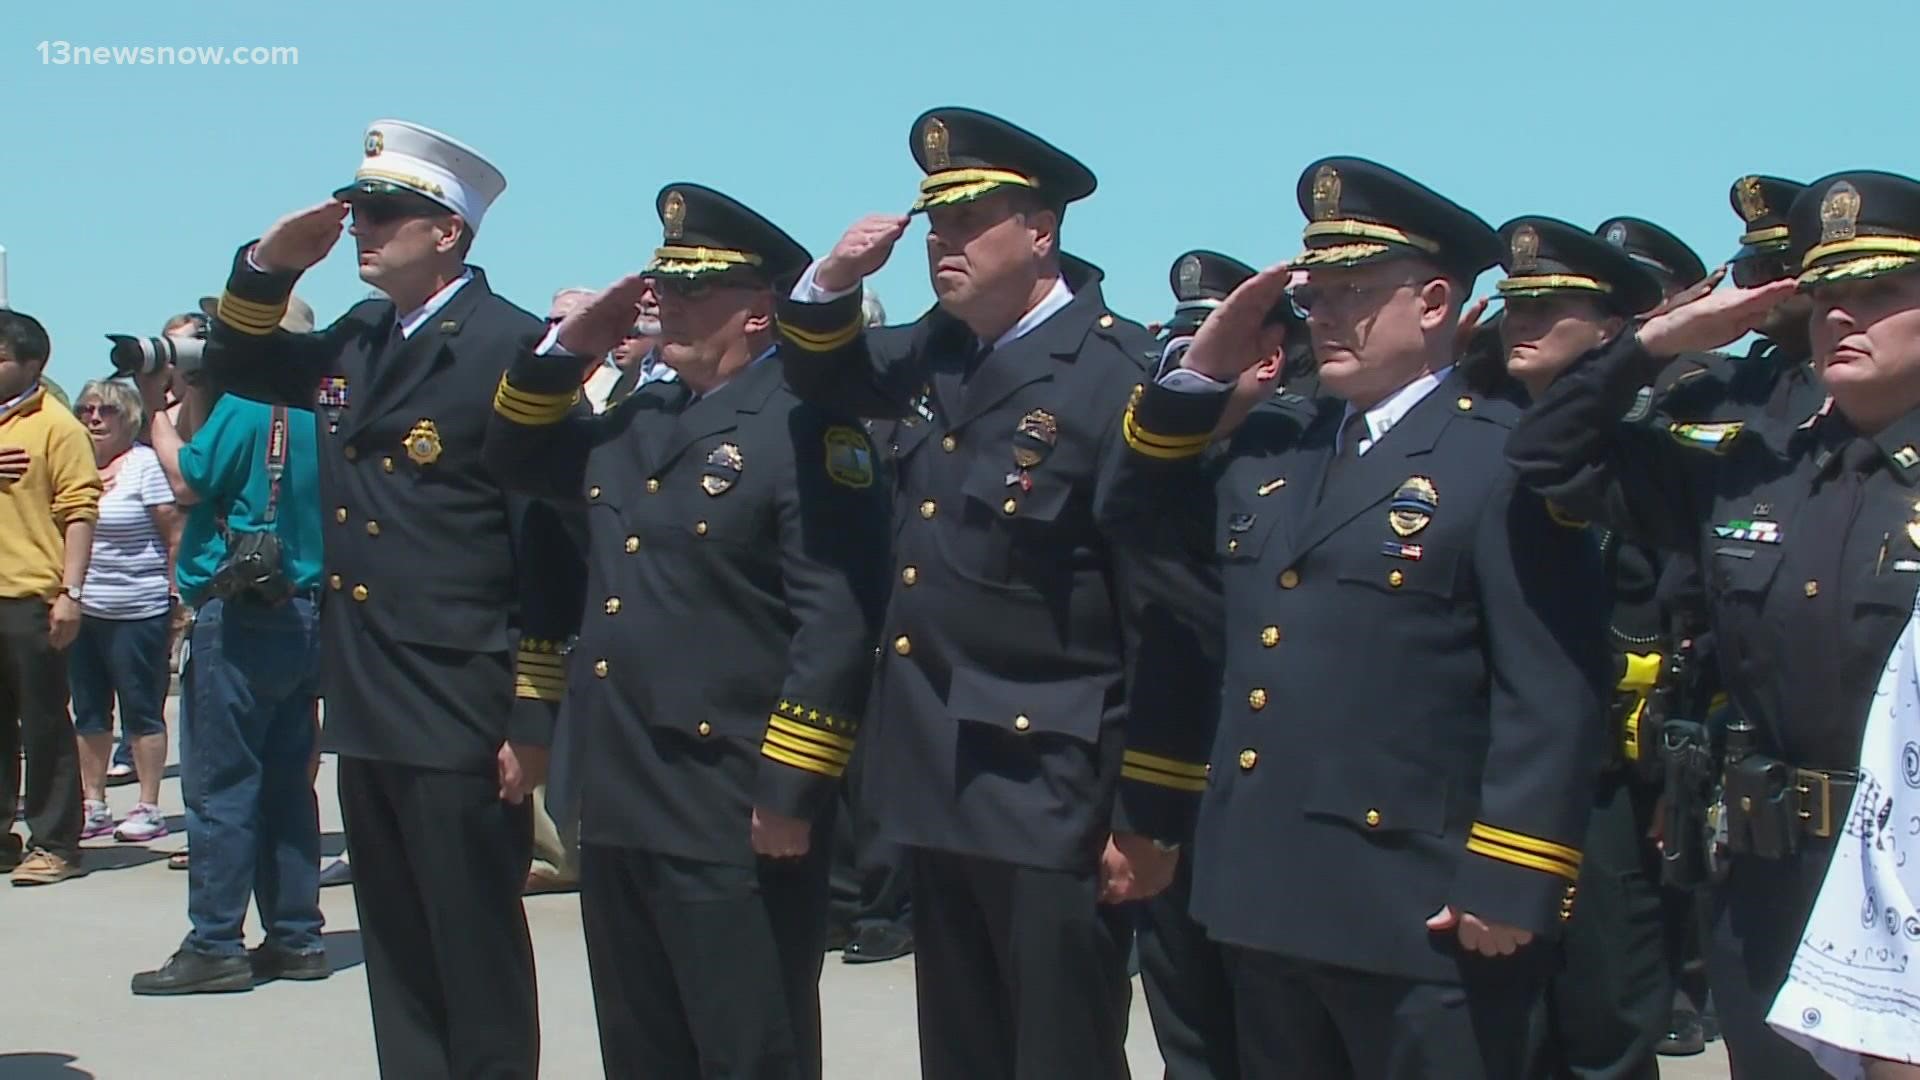 The annual law enforcement officers' memorial ceremony happened at the Virginia Beach Oceanfront Wednesday.